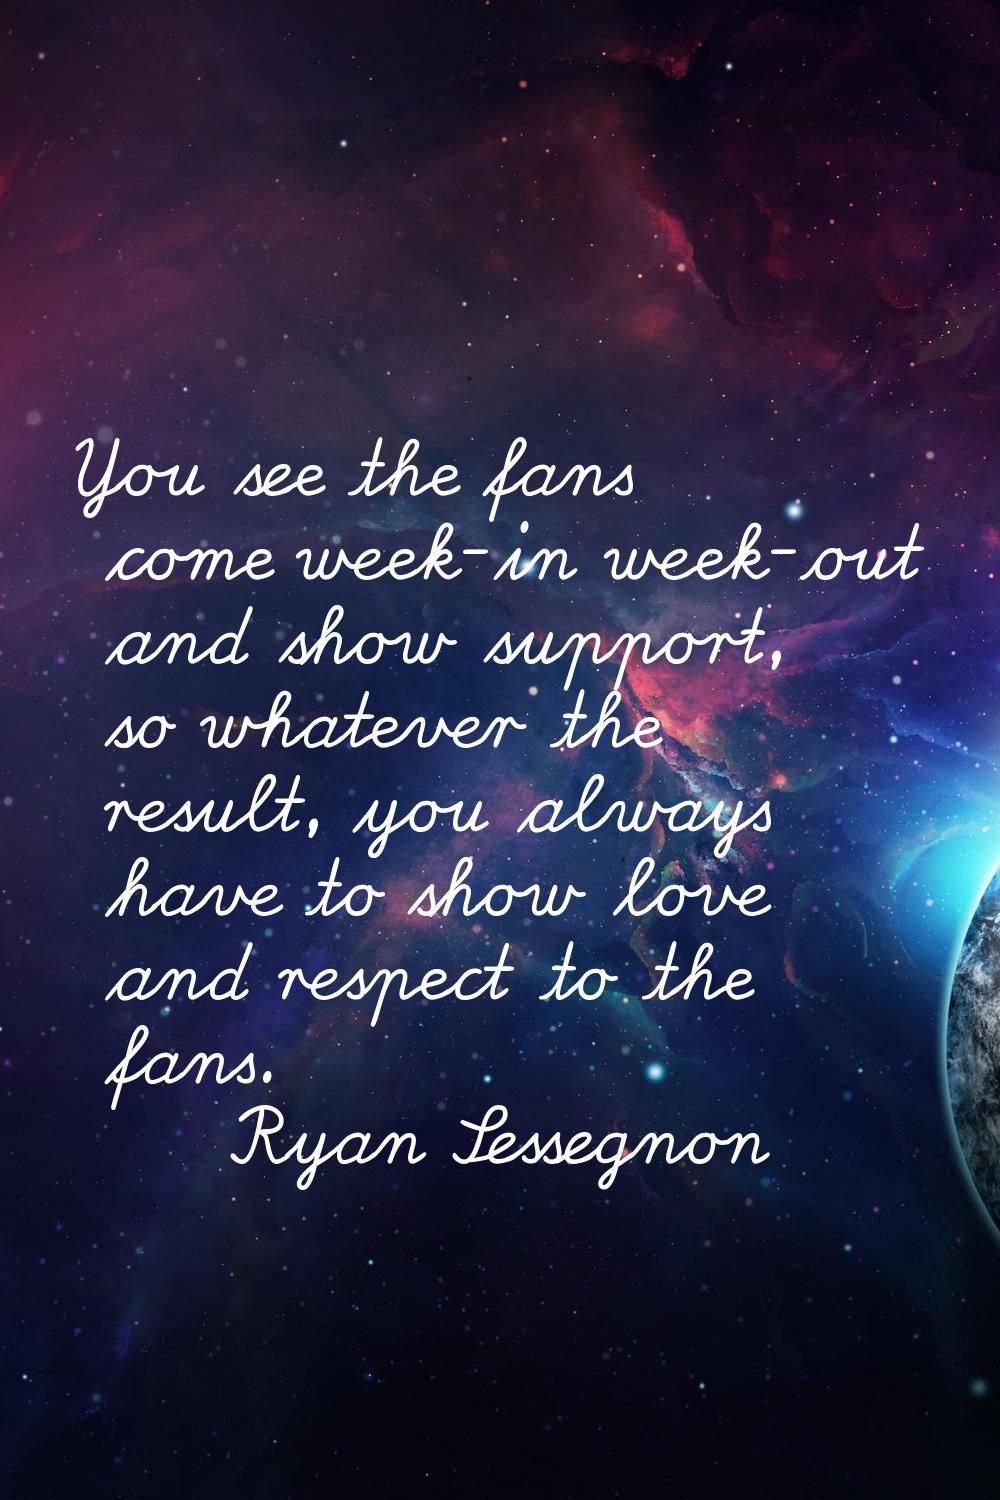 You see the fans come week-in week-out and show support, so whatever the result, you always have to